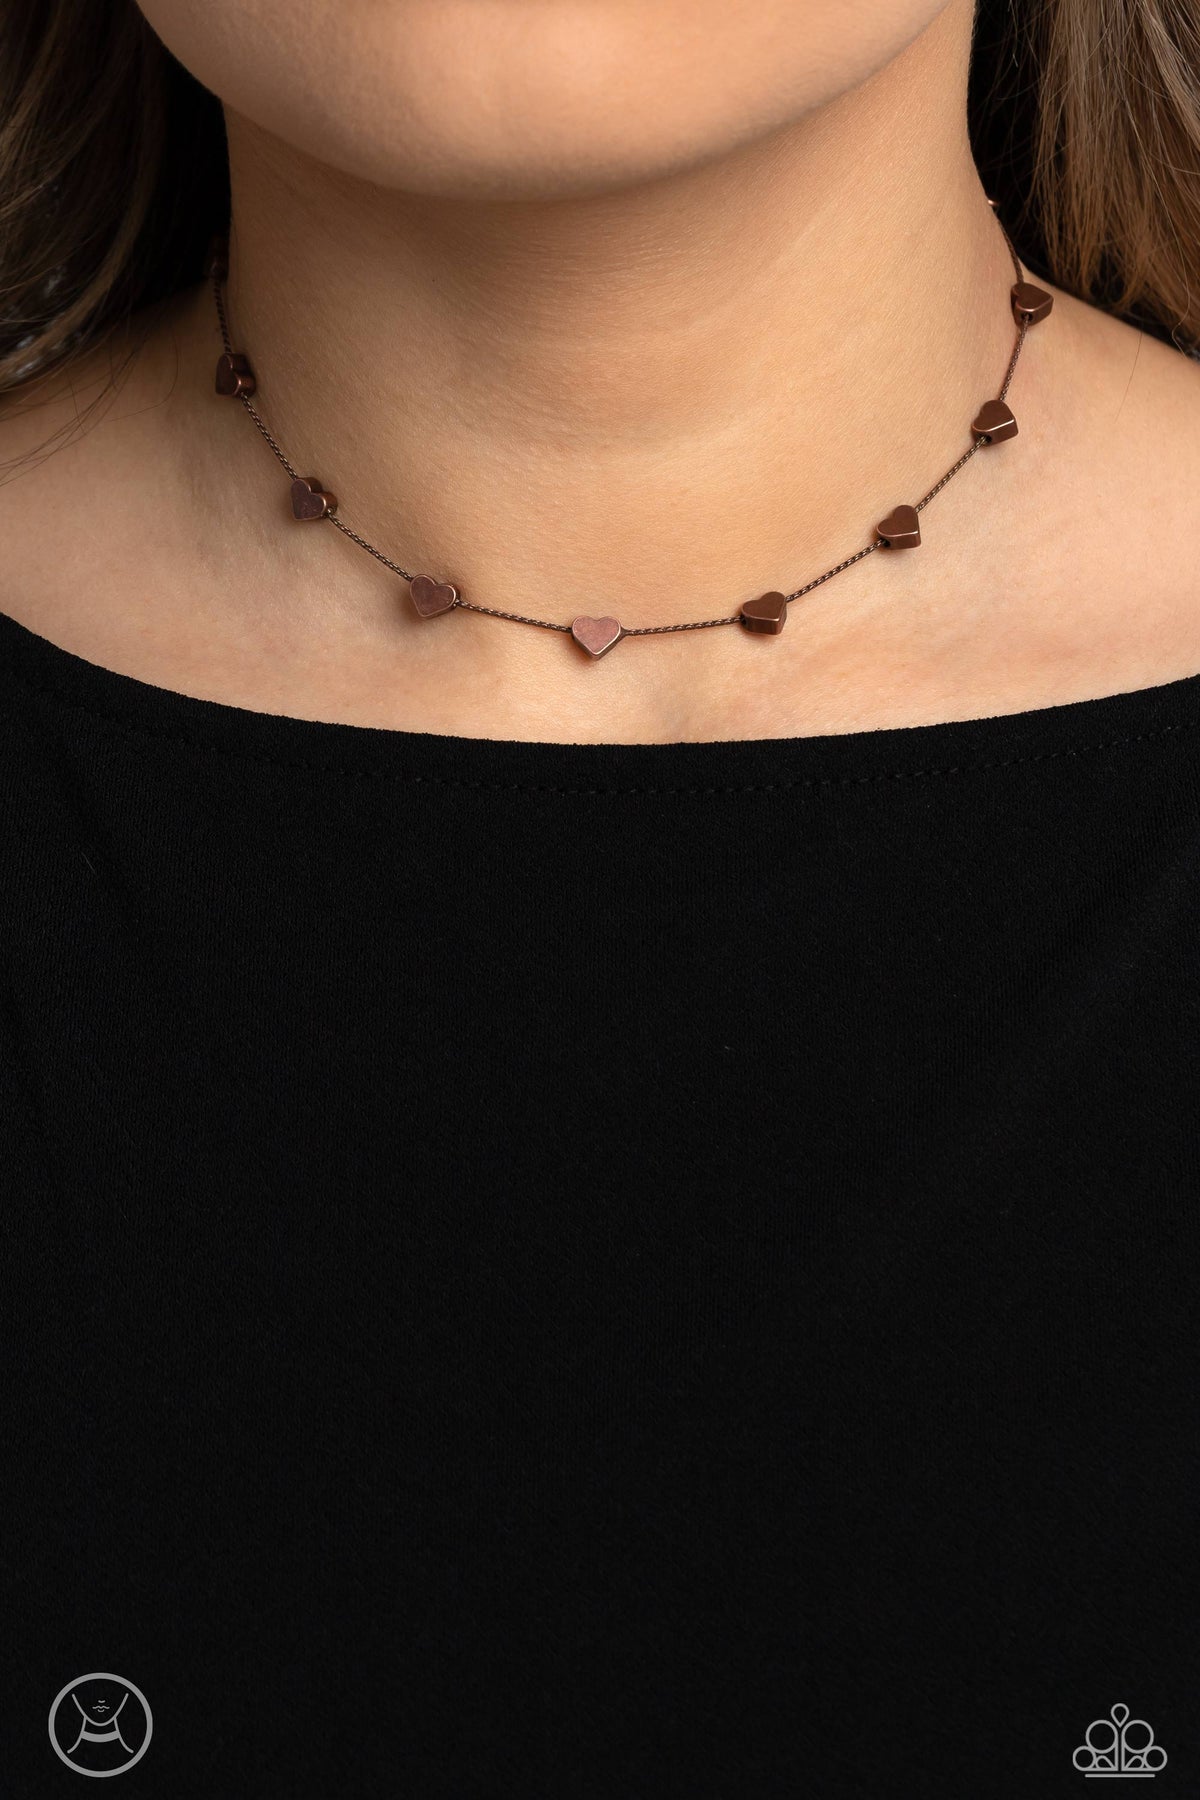 Public Display of Affection Copper Heart Choker Necklace - Paparazzi Accessories-on model - CarasShop.com - $5 Jewelry by Cara Jewels